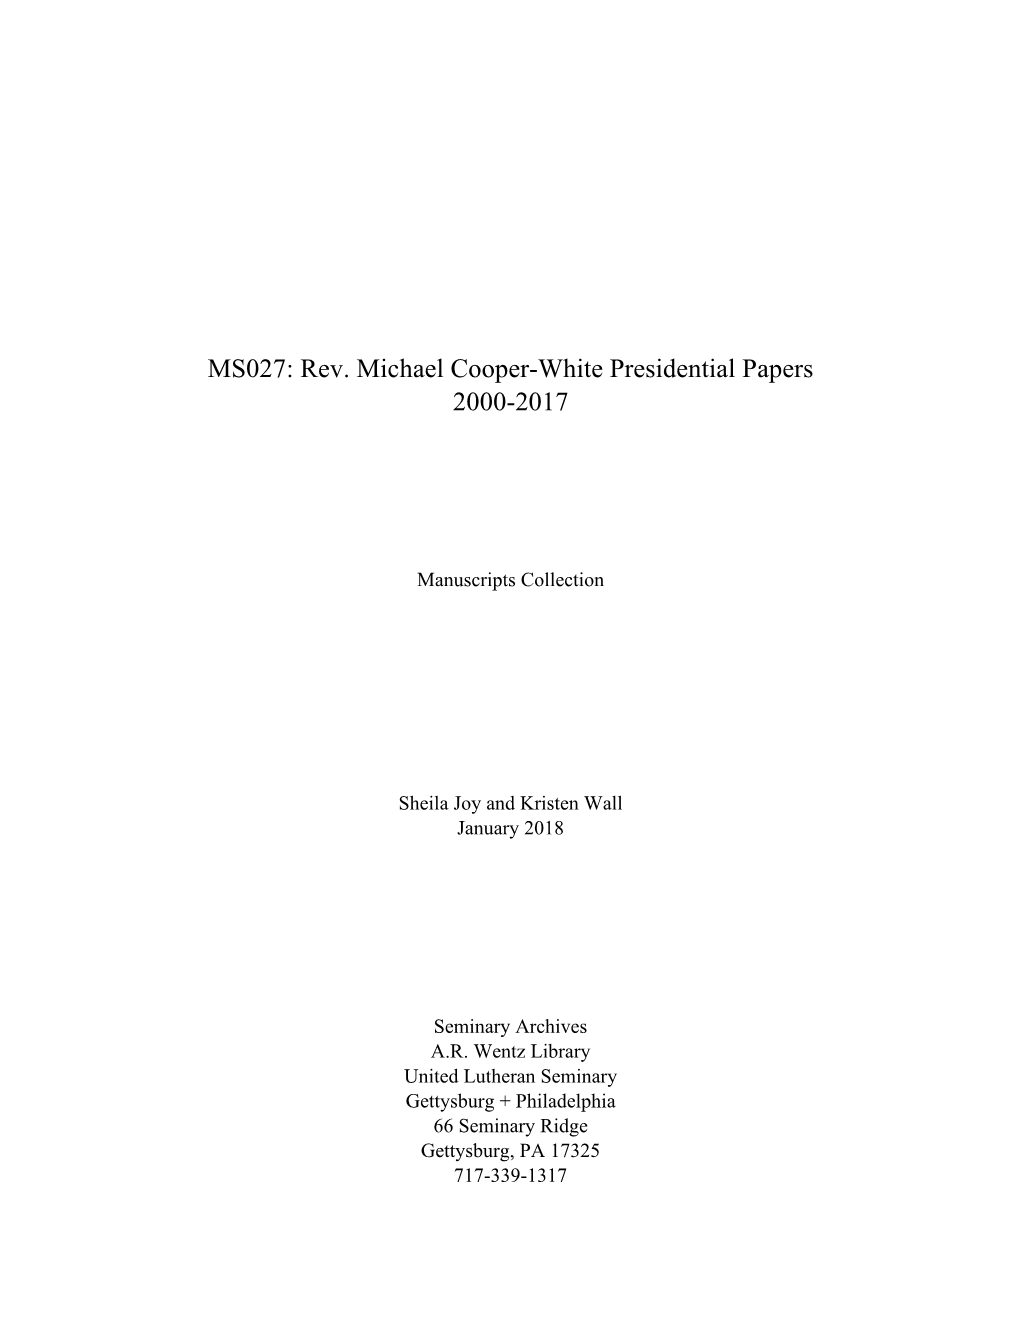 MS027: Rev. Michael Cooper-White Presidential Papers 2000-2017